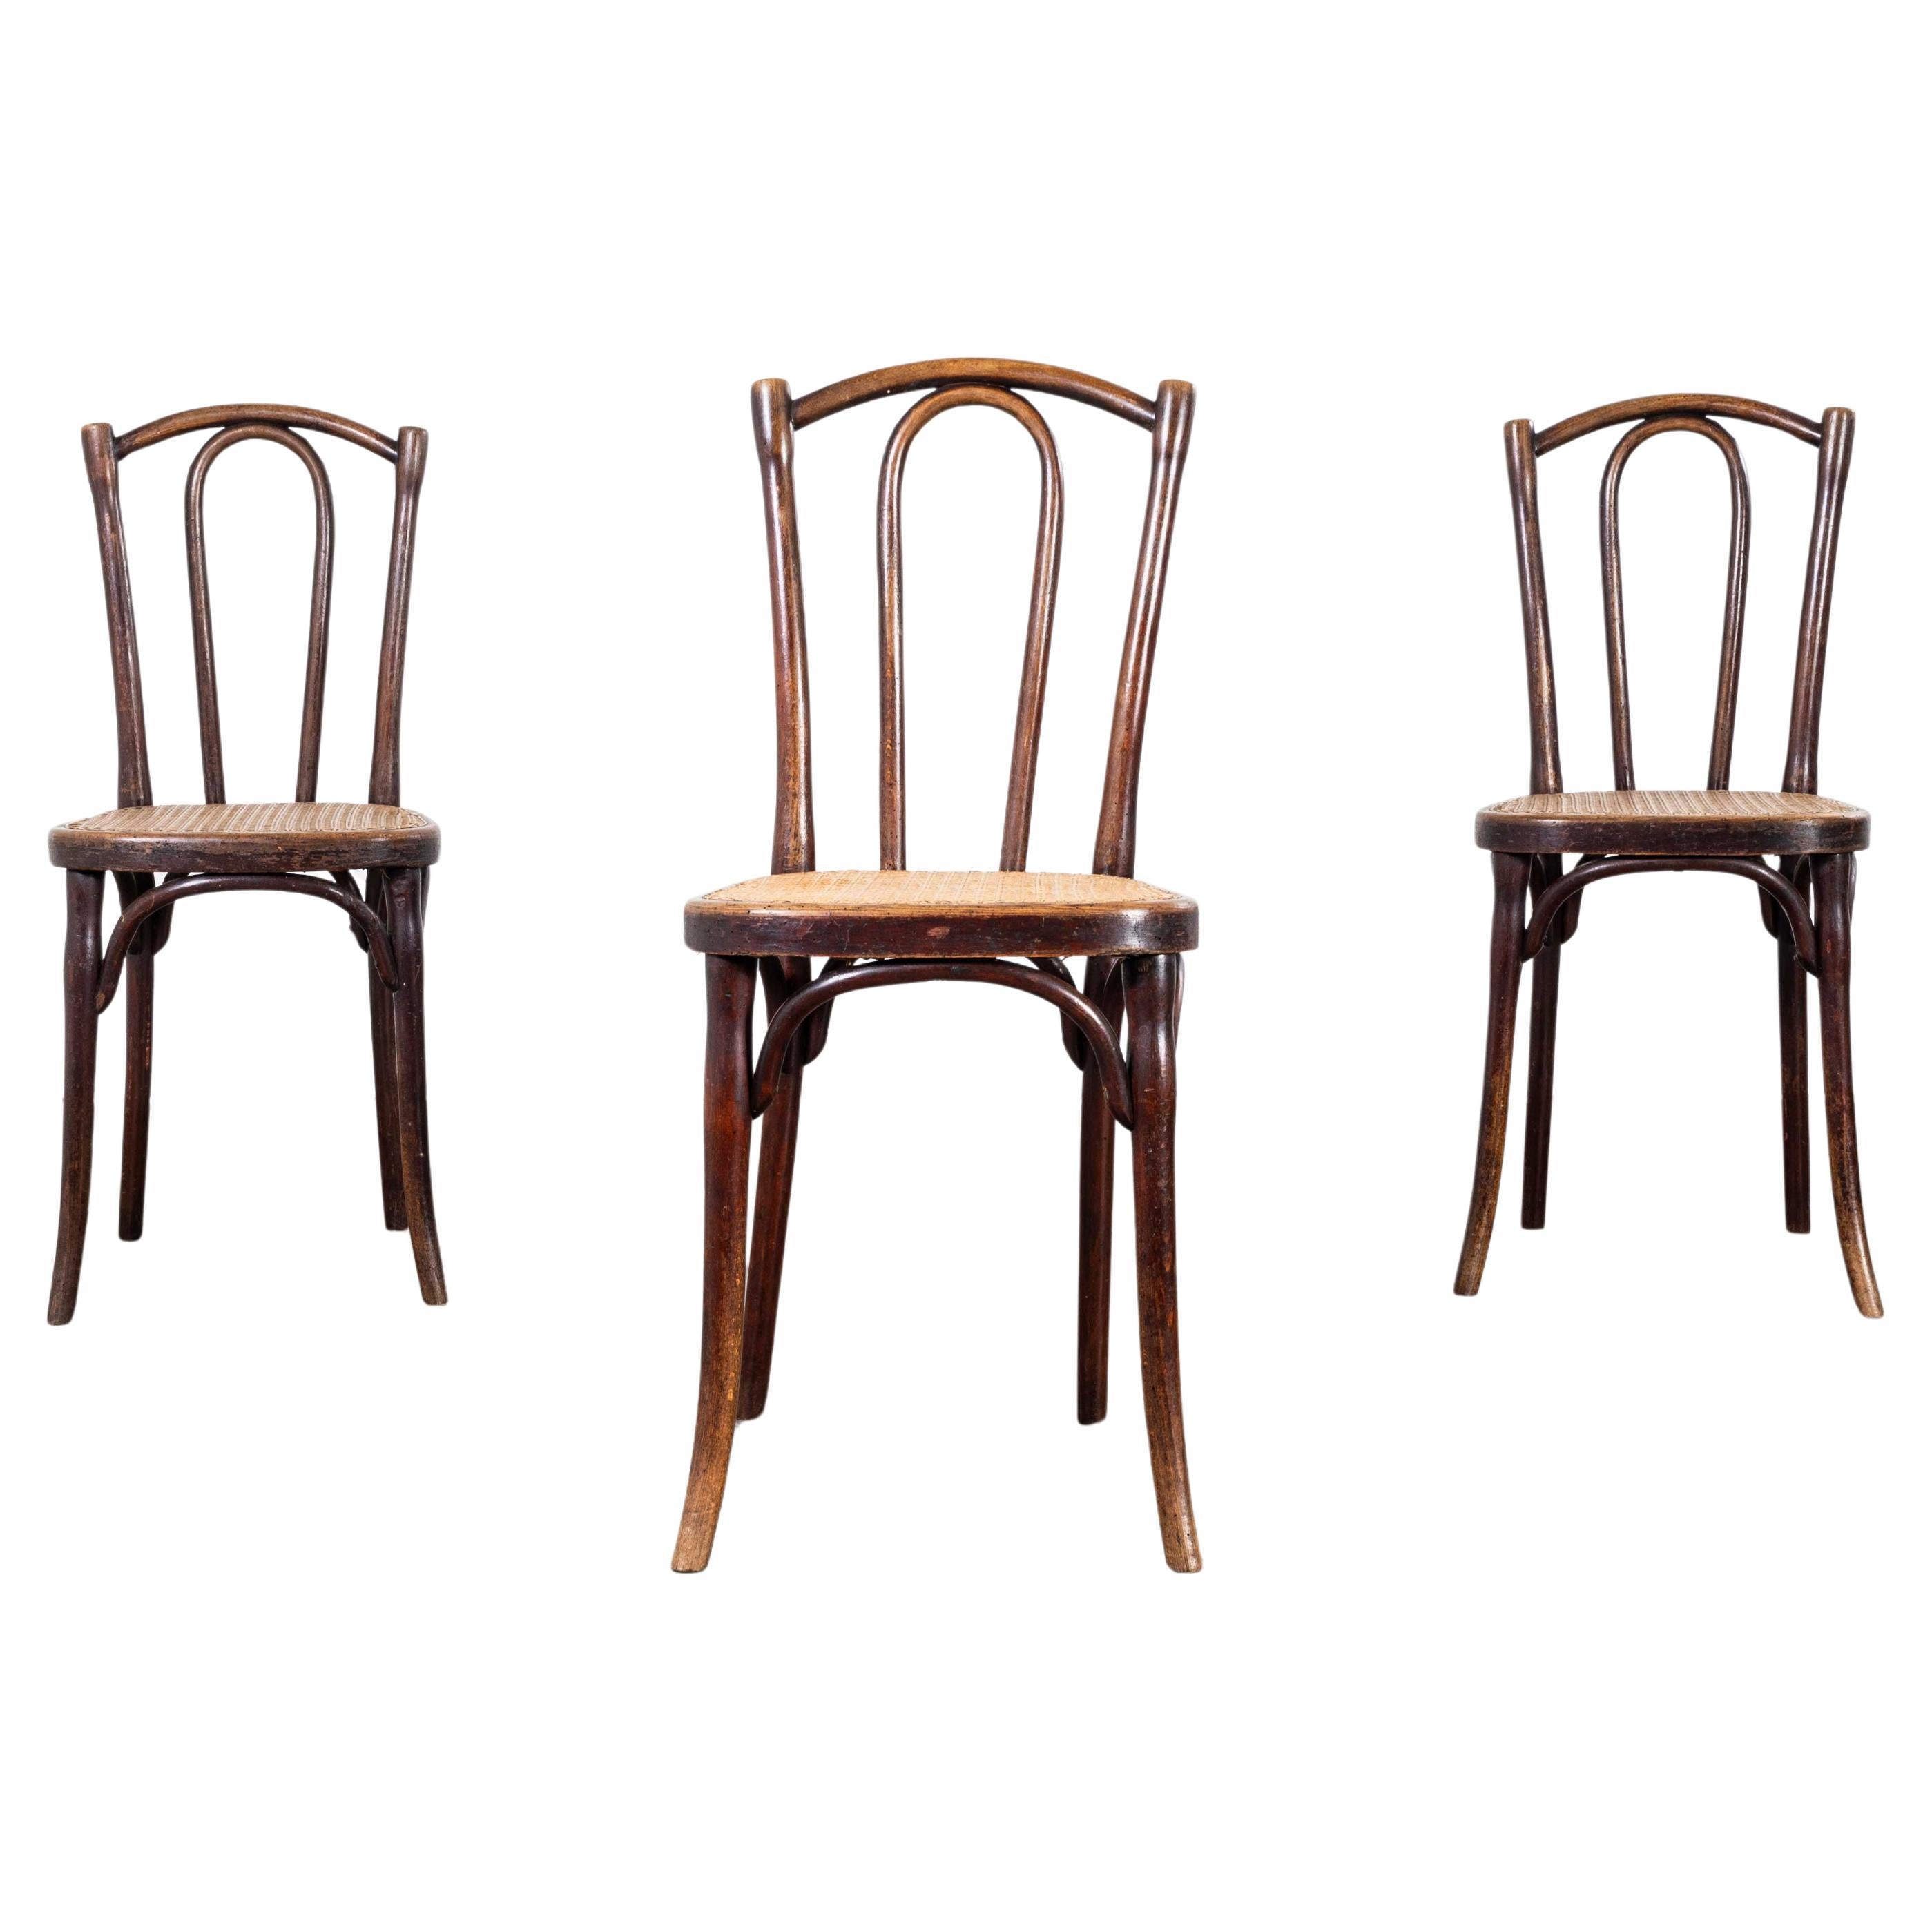 1920’s Thonet Original Cane Seated Dining Chairs – Set of Three For Sale